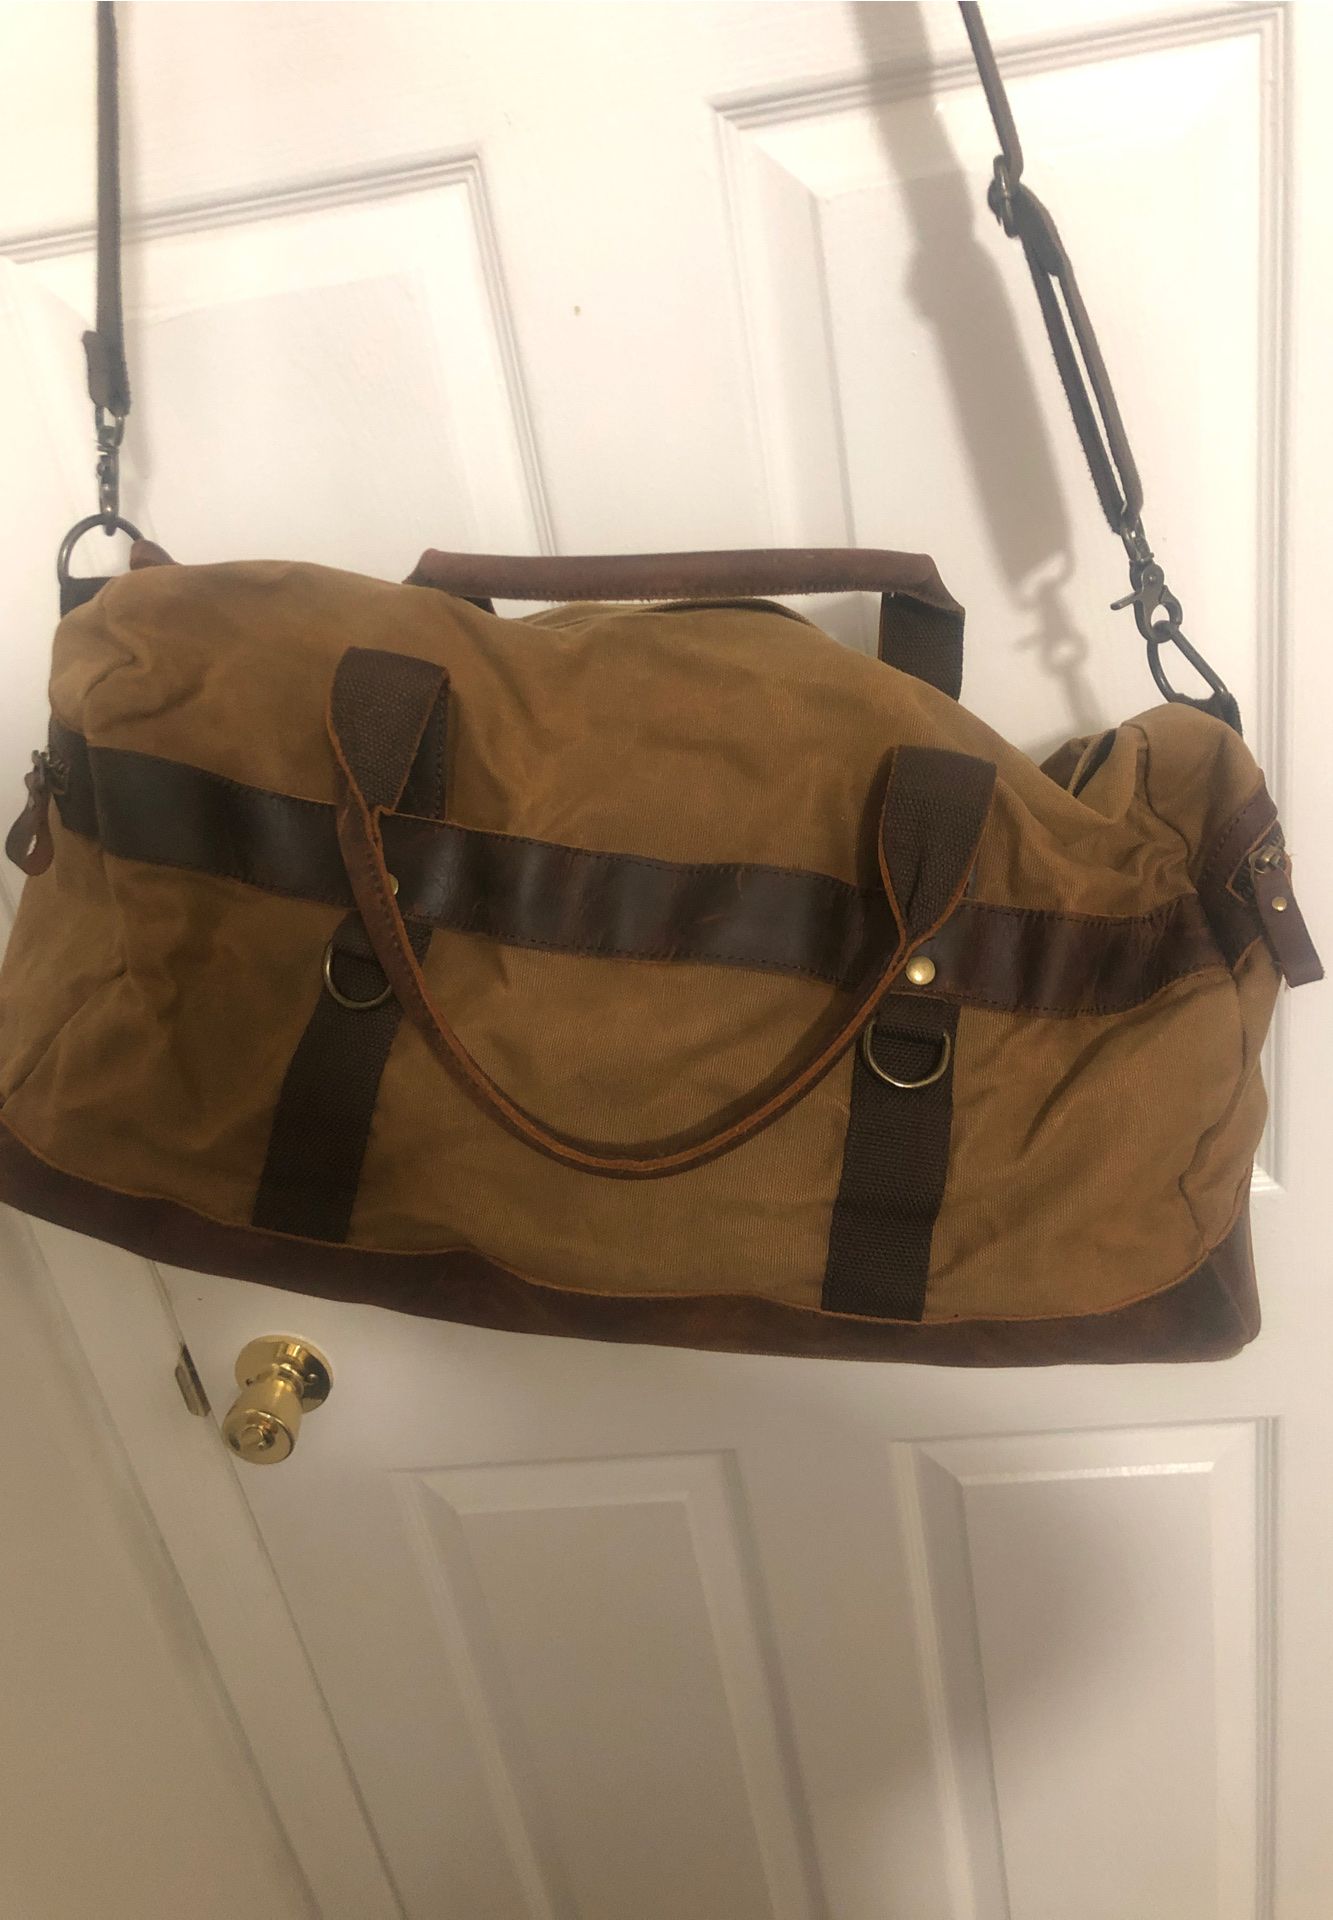 Rustic Duffle Bag with leather